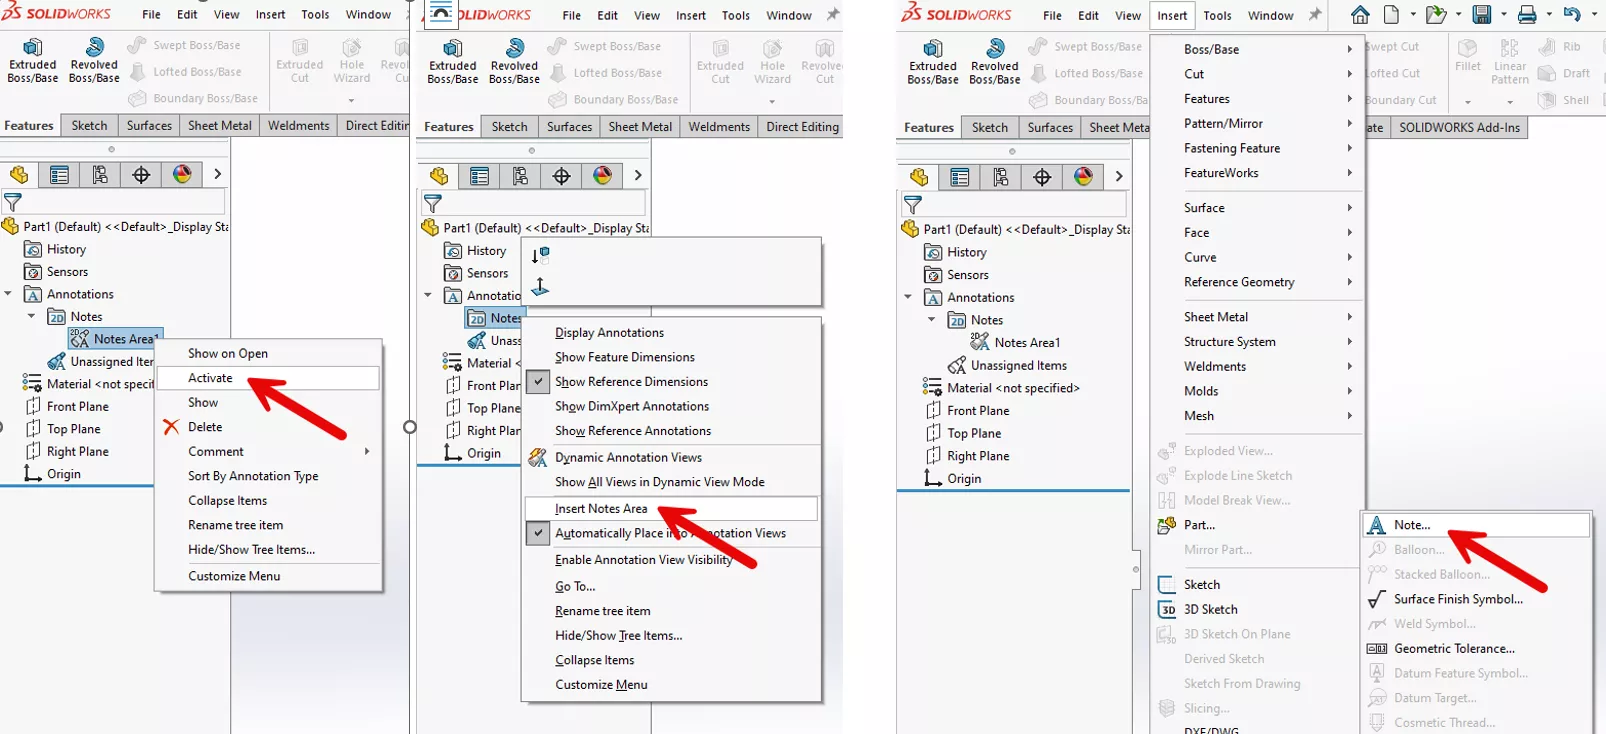 How to Create a SOLIDWORKS Note Annotation in the Notes Area